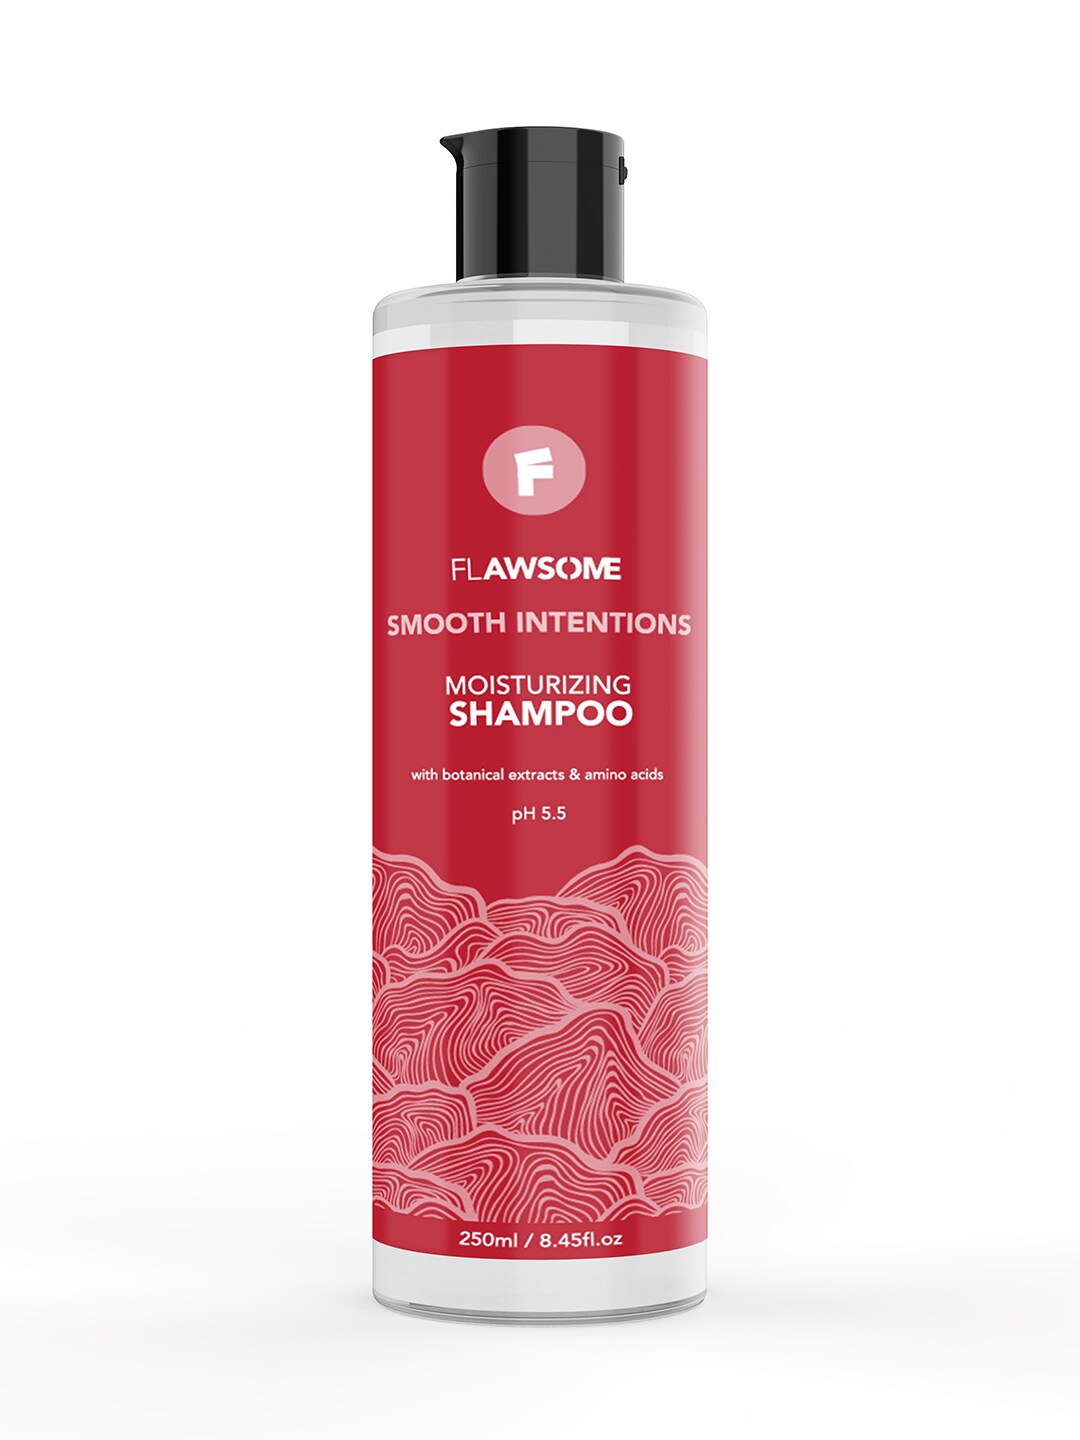 Flawsome Smooth Intentions Moisturizing Shampoo - 250 ml Price in India